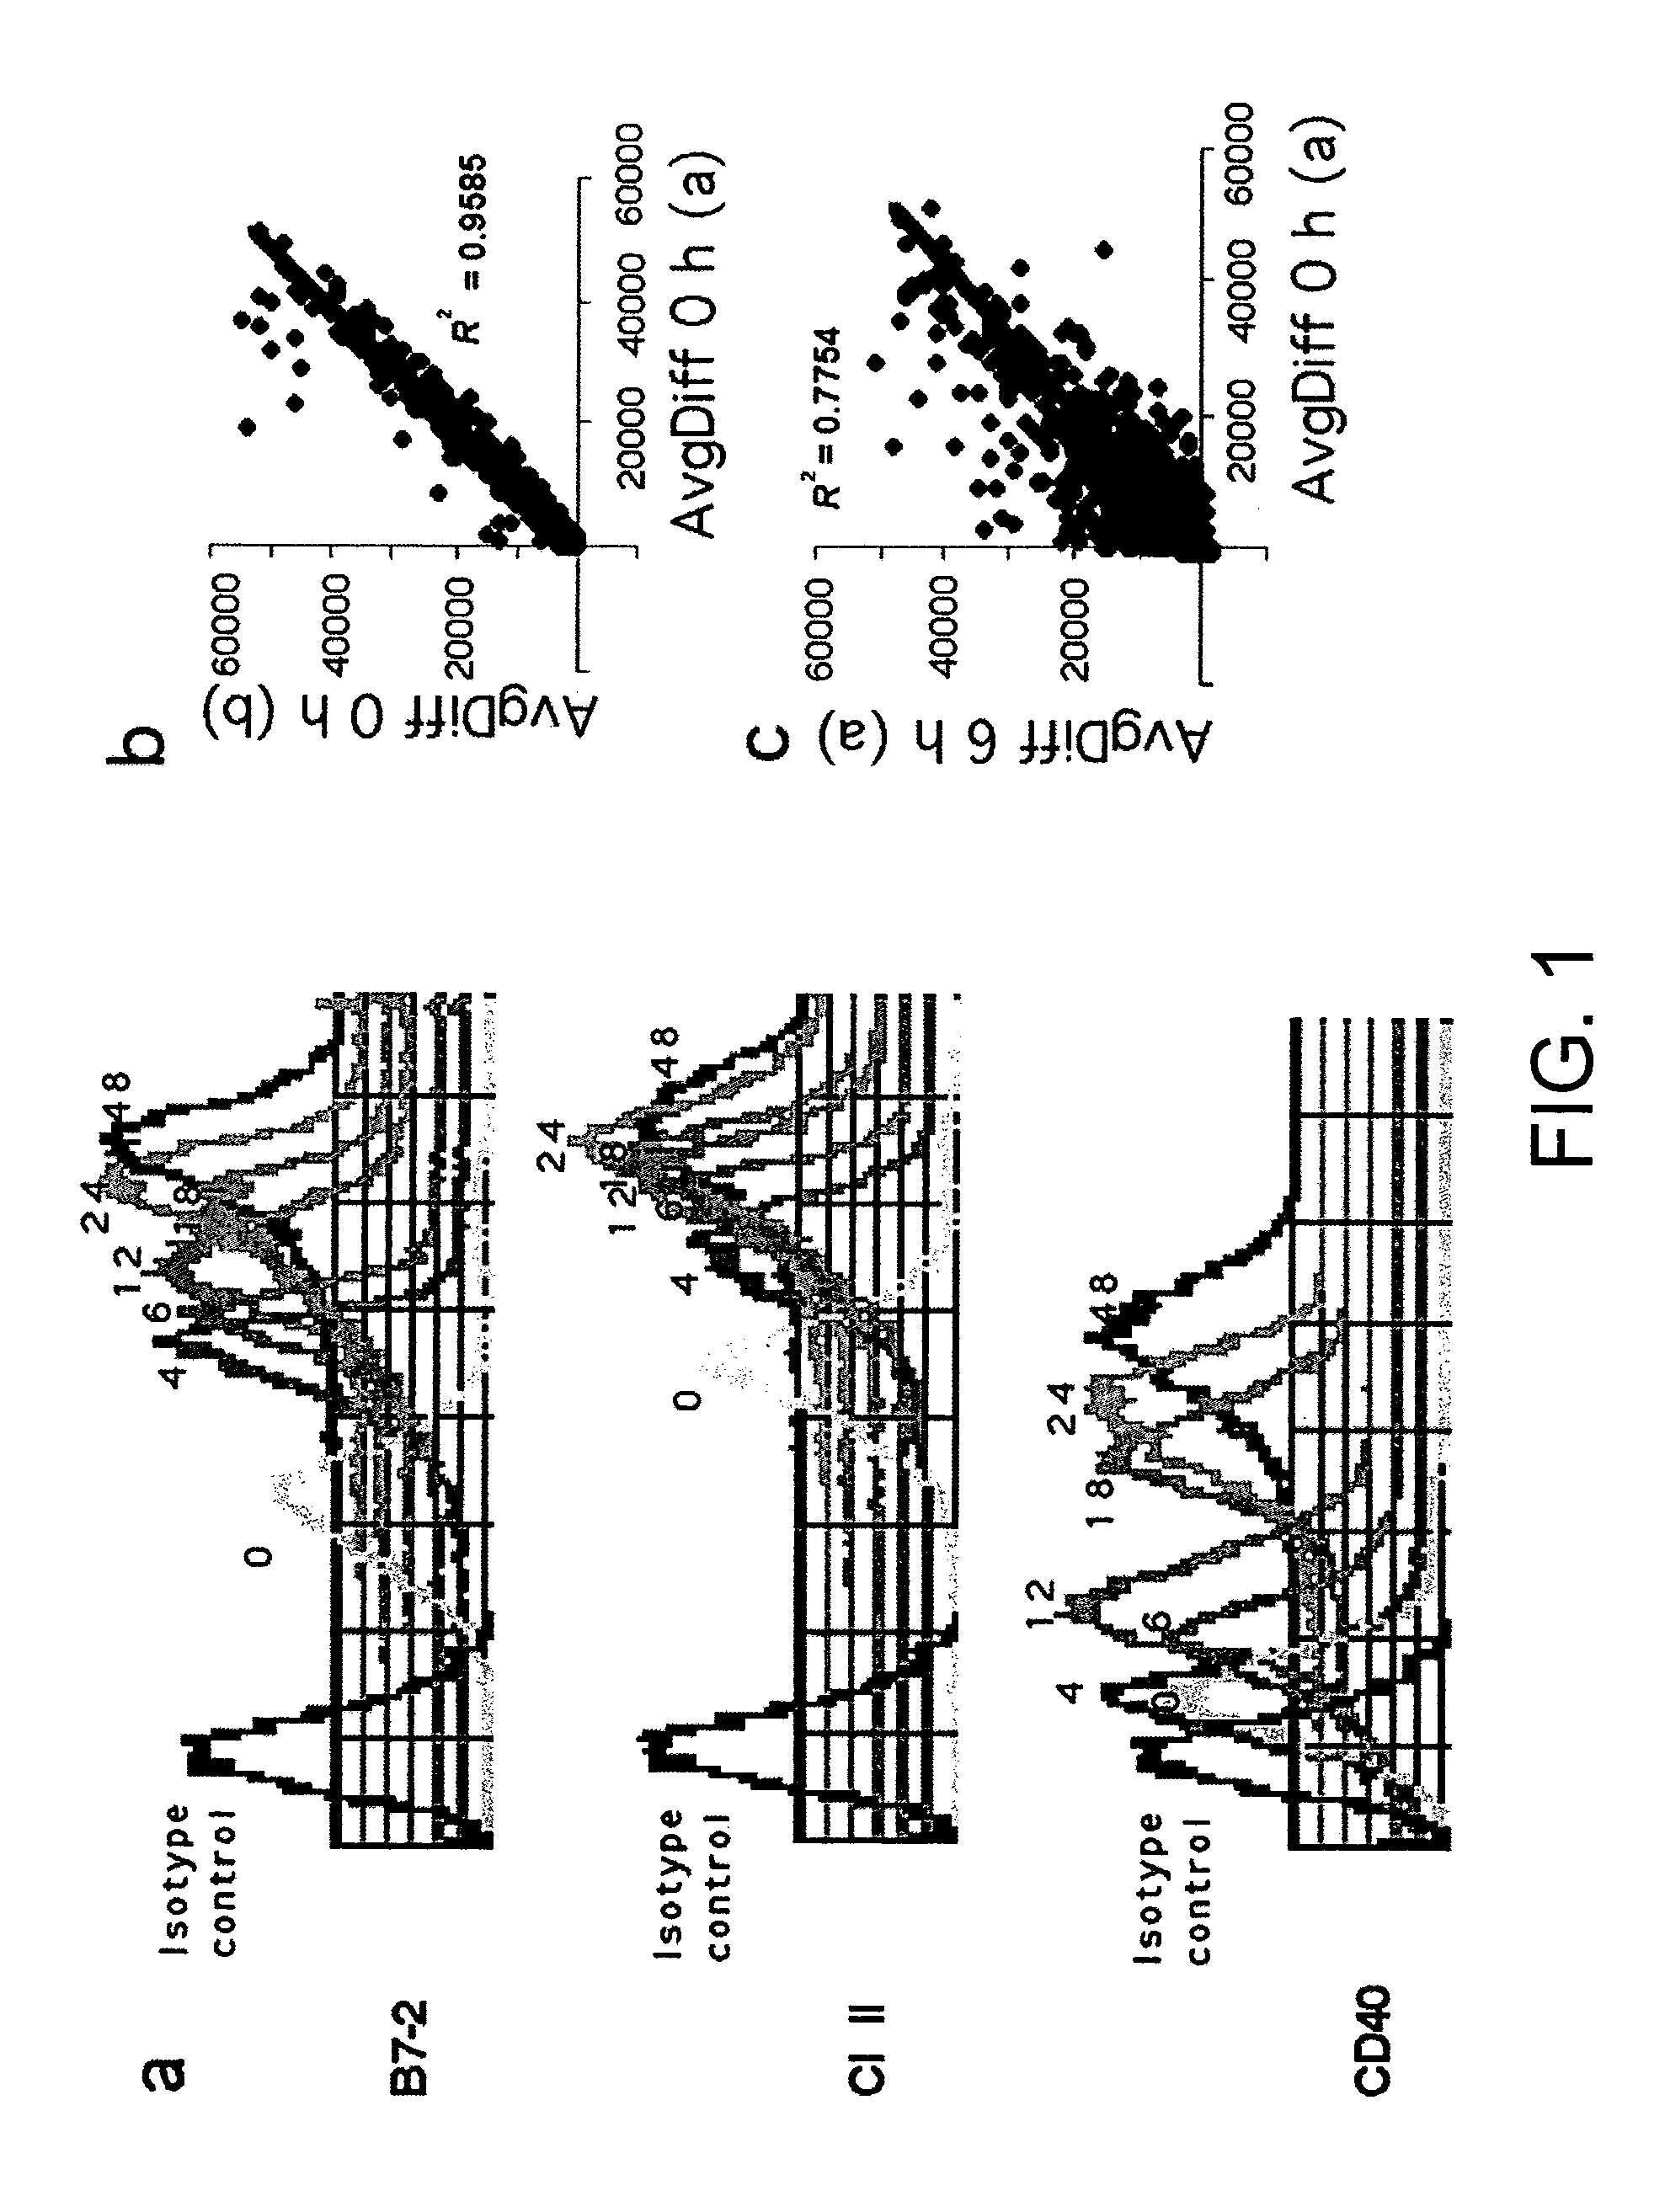 Dendritic cells and the uses thereof in screening cellular targets and potential drugs